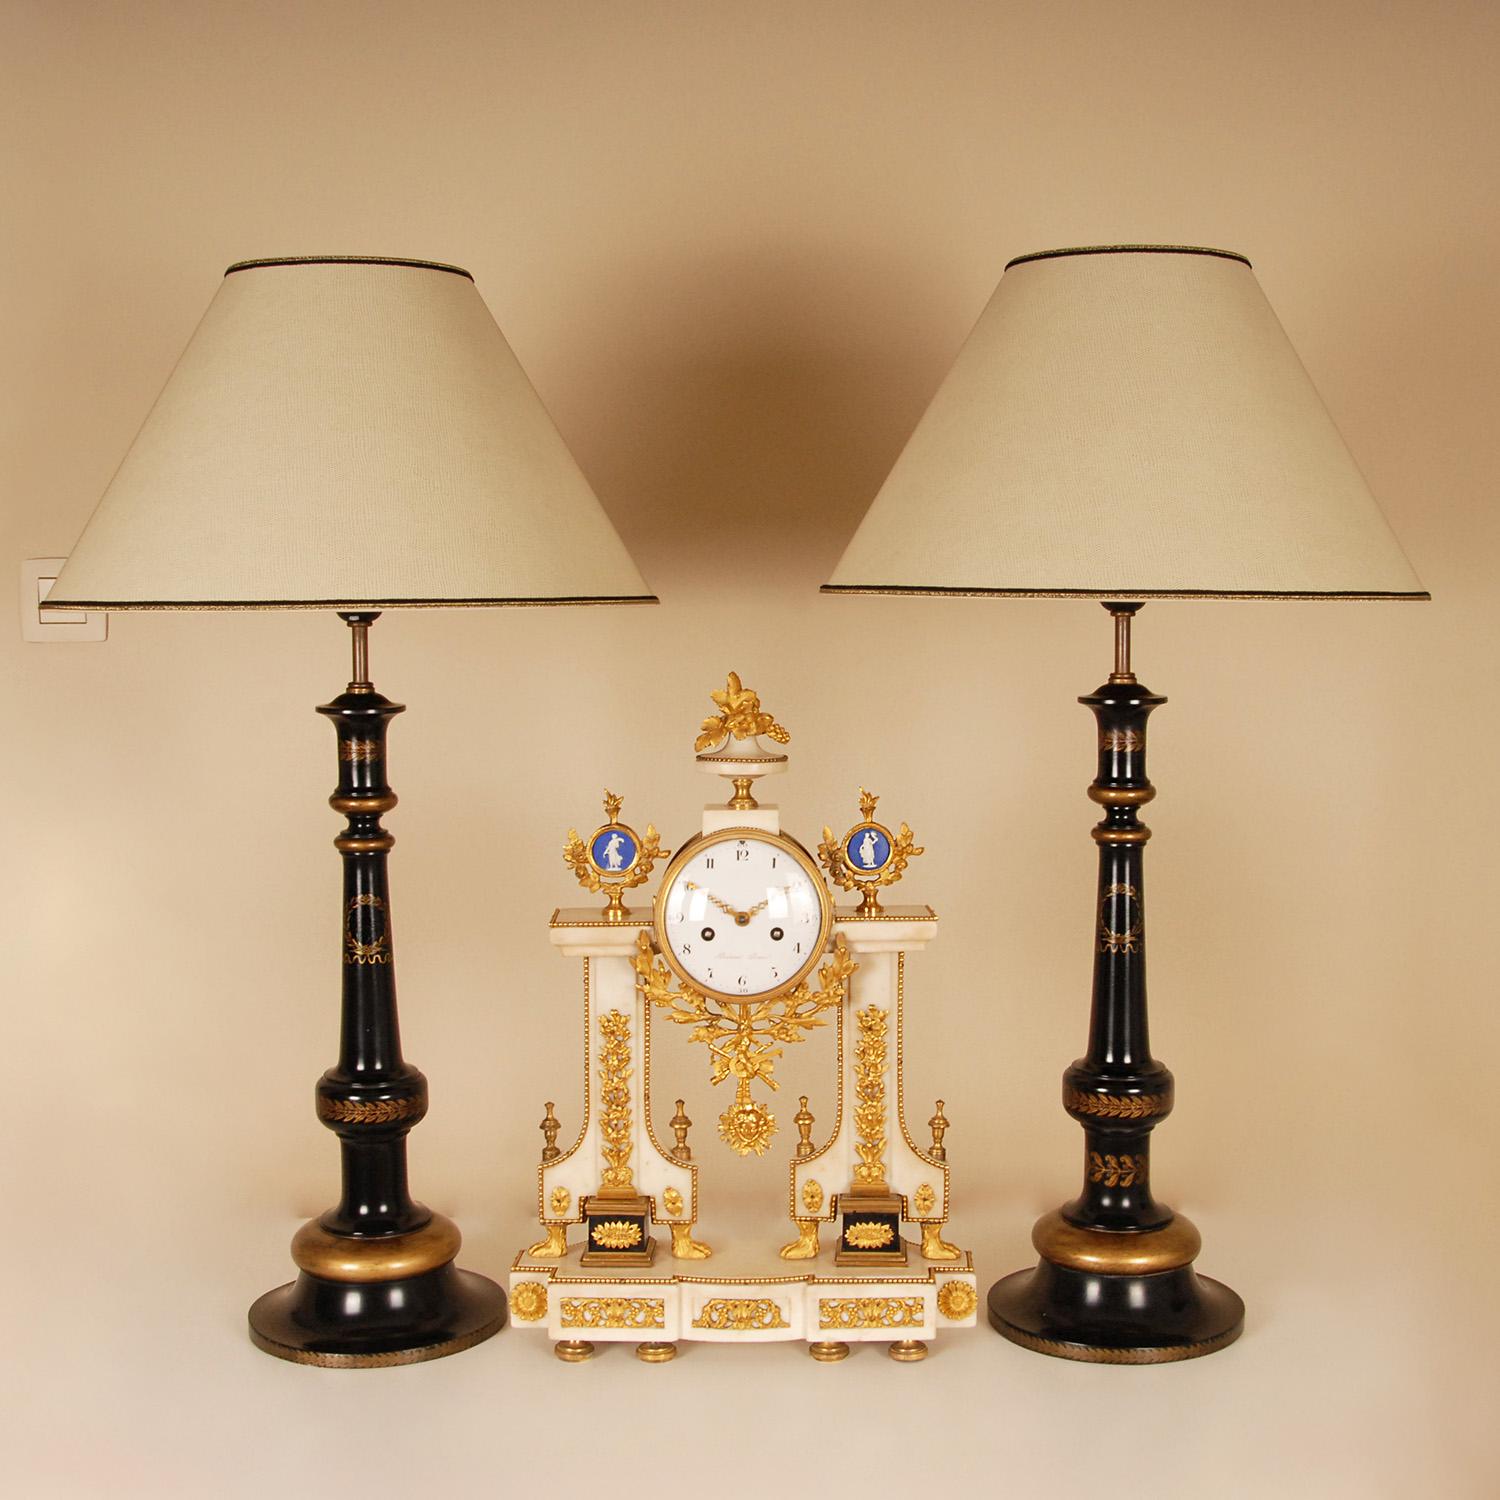 Vintage Tradidional English Table Lamps Black and Gold Column Table Lamps
Style: English, Vintage, Victorian, Mid Century, Traditional, Classic
Design: Traditional Victorian Column lamps in the manner of Caldwell, Chapman, Henredon,
Maison Bagues,